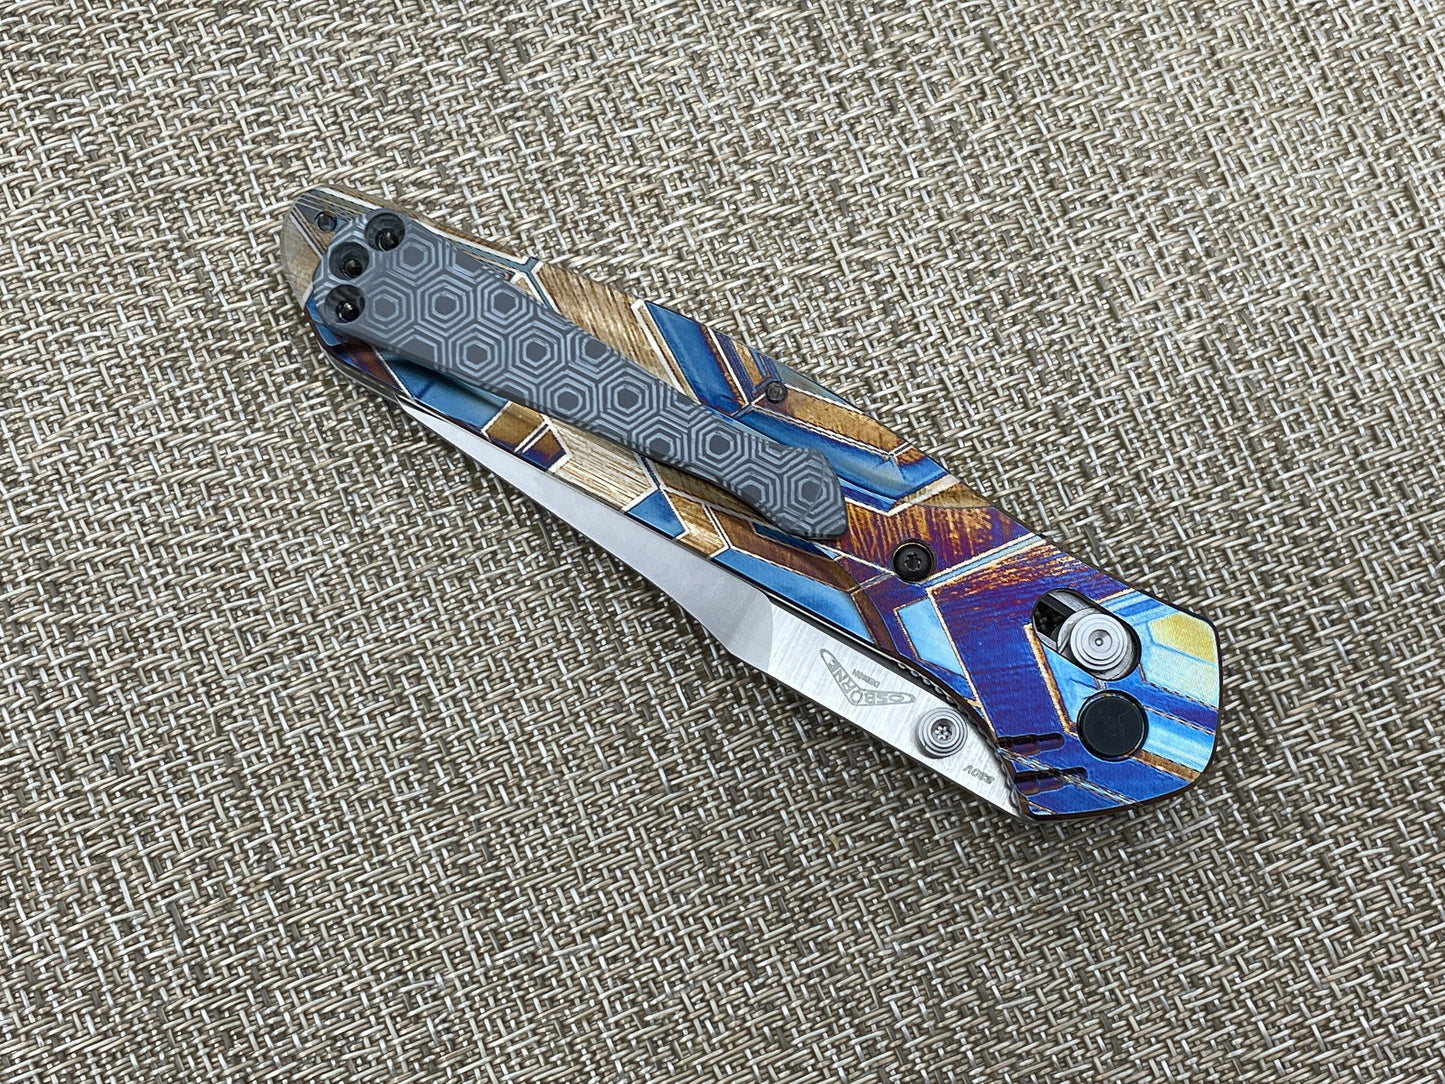 HONEYCOMB engraved Black Zirconium SPIDY CLIP for most Benchmade models